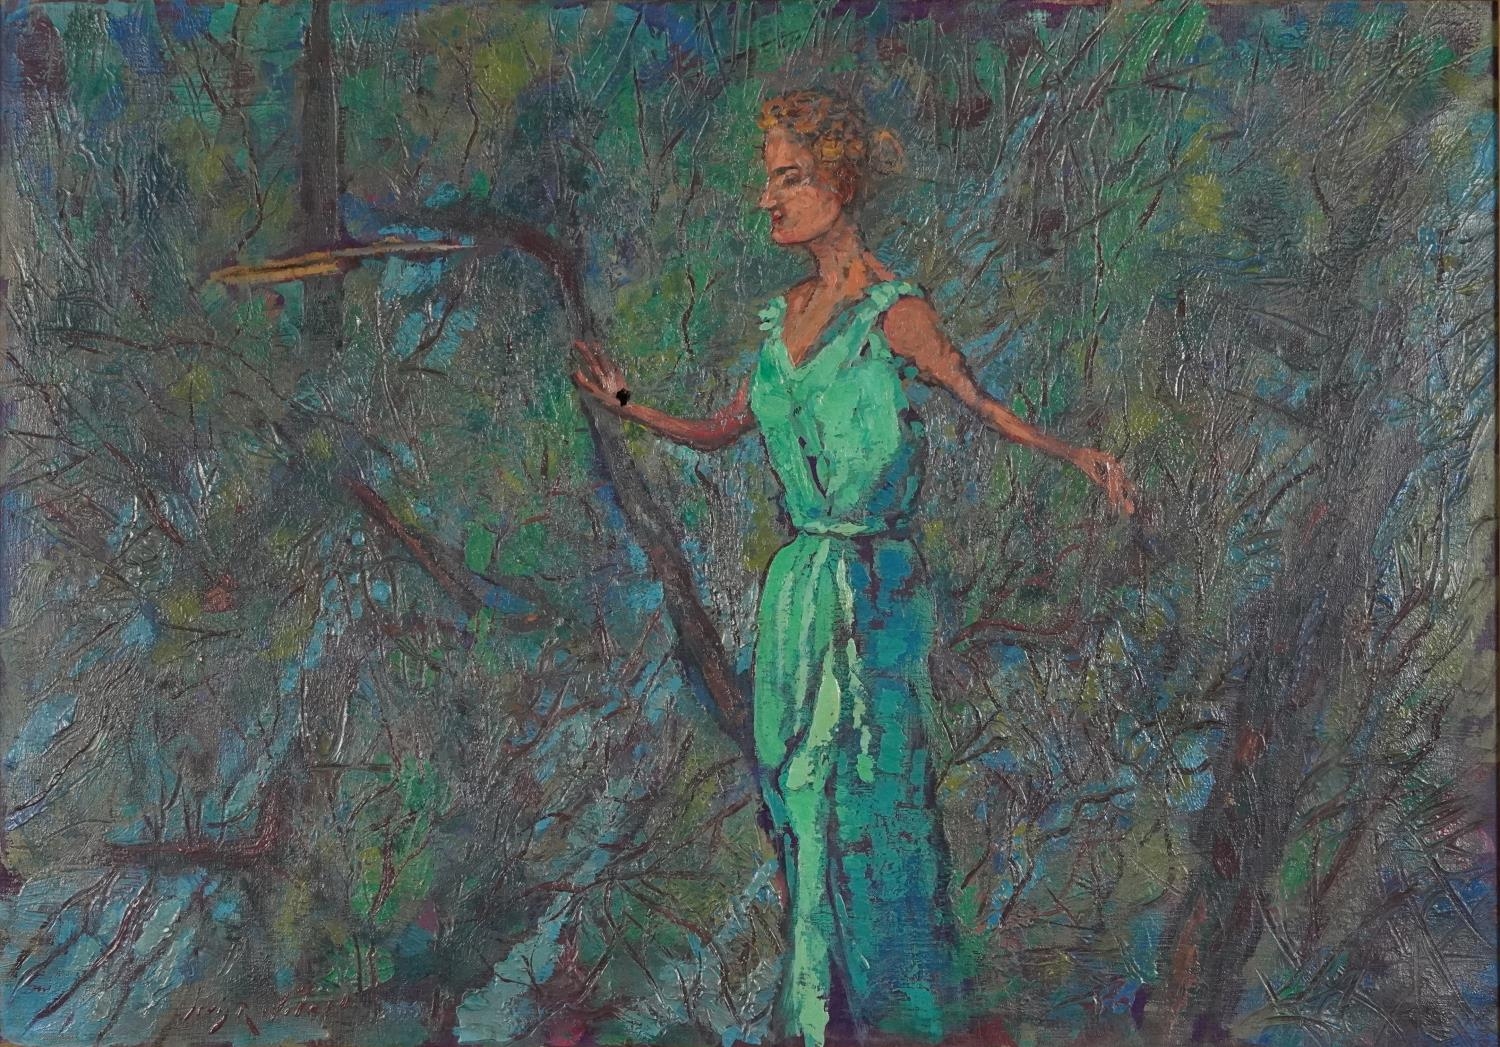 Female wearing a turquoise dress before a forest, Pre-Raphaelite school oil on canvas, in a gilt